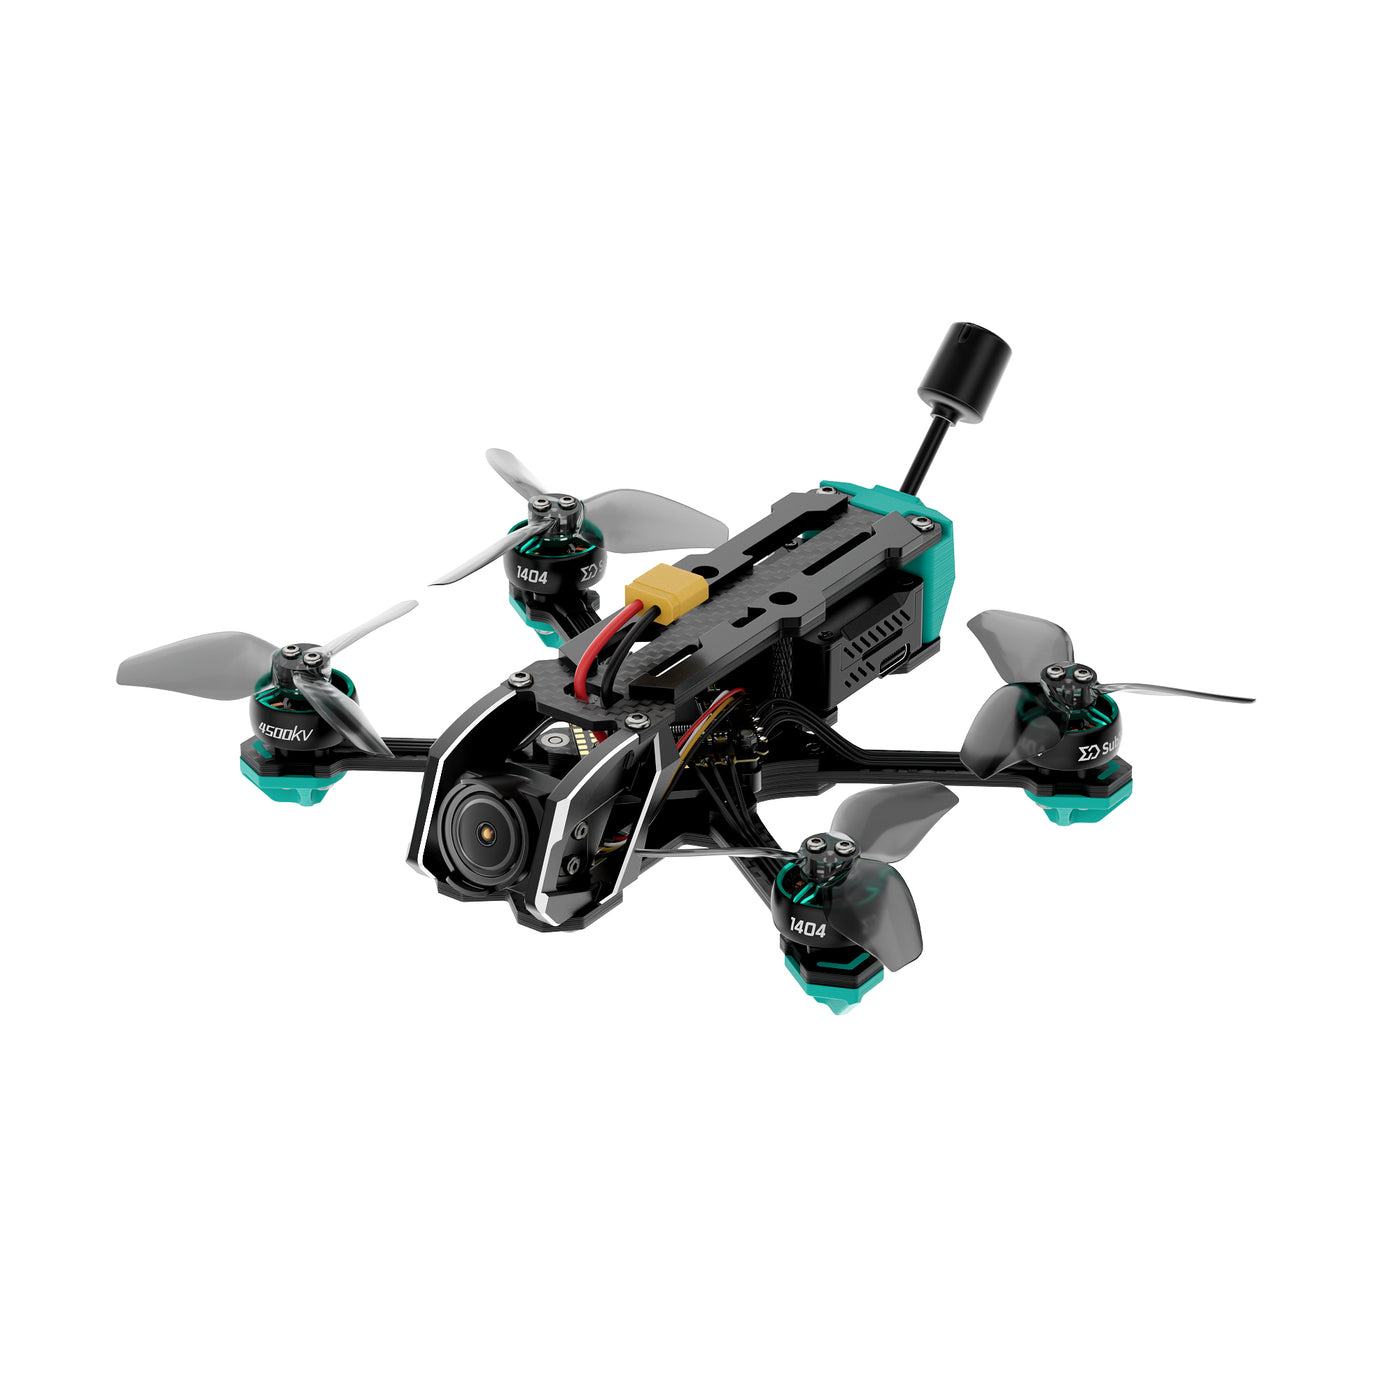 Sub250 Oasisfly25 2.5 Inches HD O3 Freestyle Quadcopter